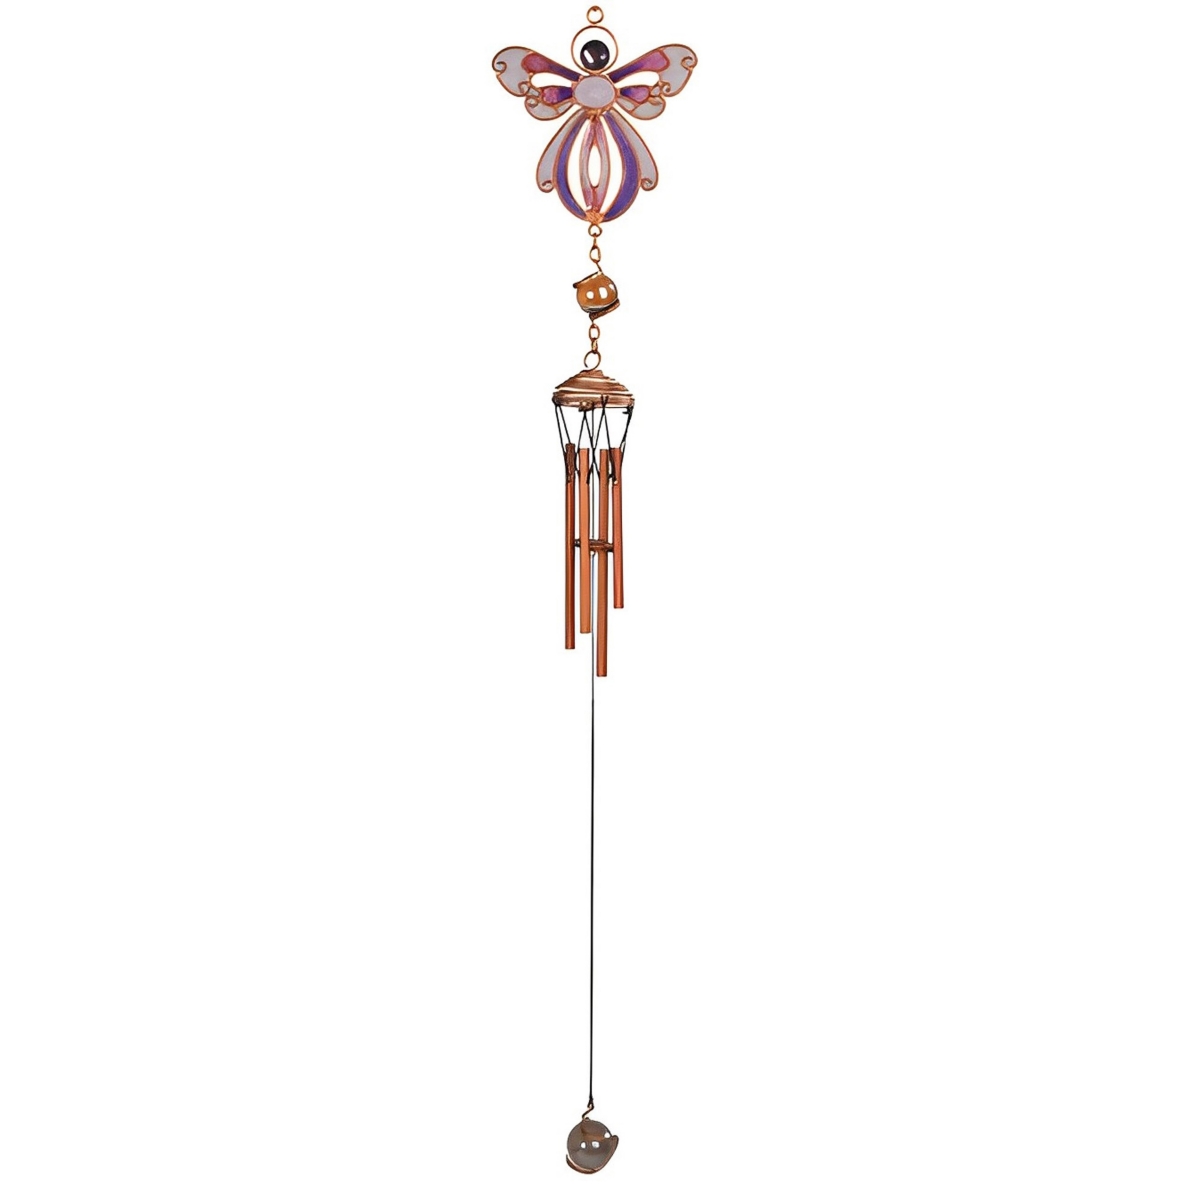 18" Long Purple Angel Copper and Gem Wind Chime Home Decor Perfect Gift for House Warming, Holidays and Birthdays - Multi